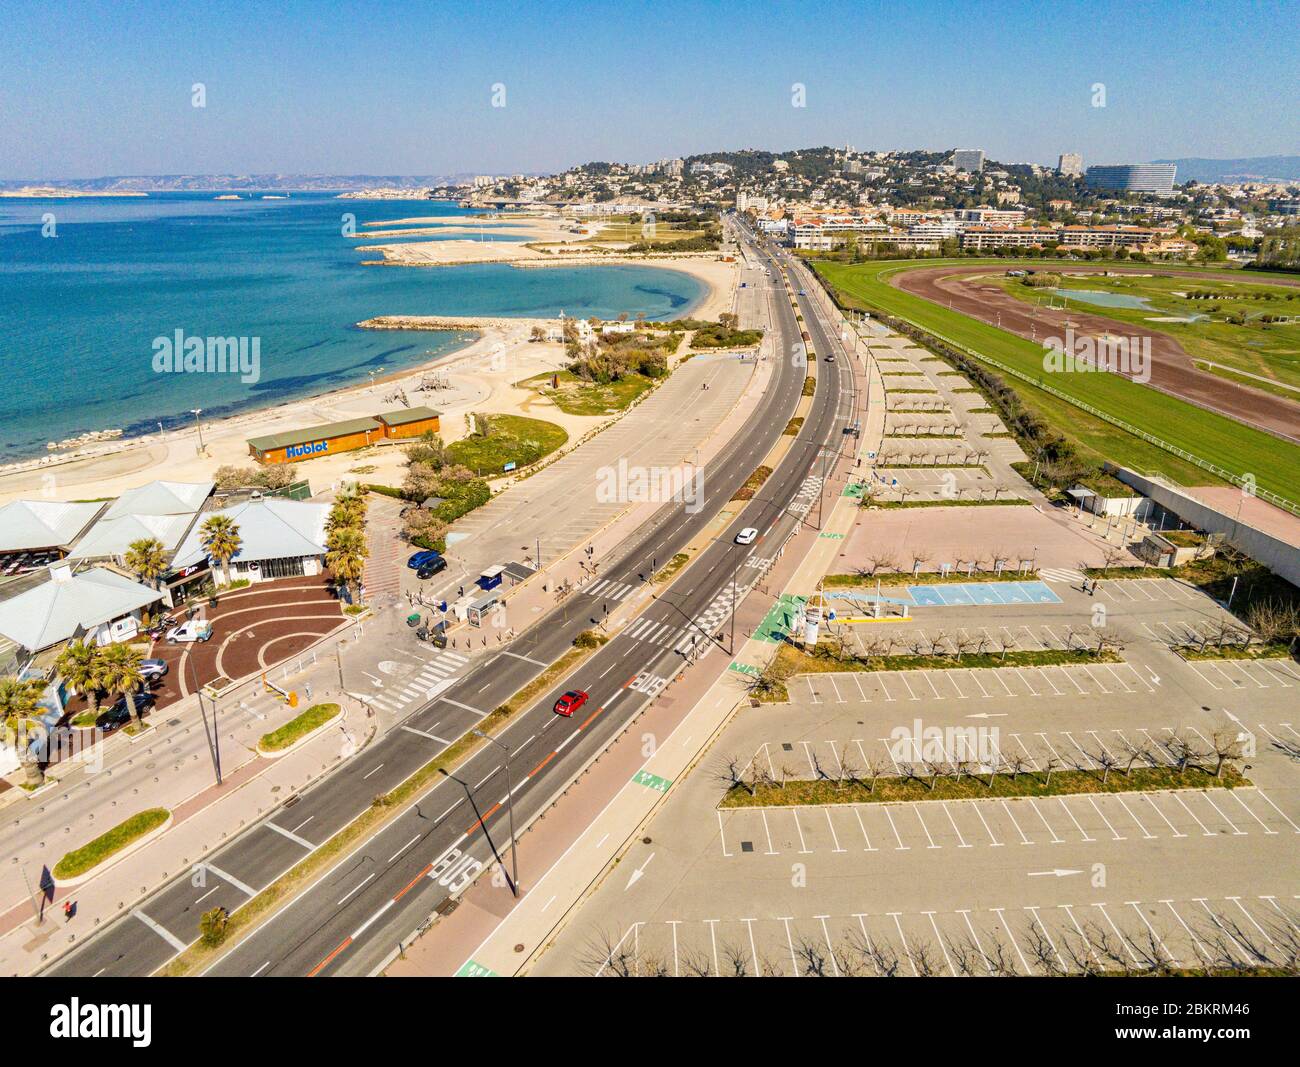 France, Bouches du Rhone, Marseille, Covid-19 or Coronavirus lockdown, the Prado beaches deserted following their closure by decree, avenue Pierre Mendes France and the empty parking lot of the Marseille Borely racetrack (aerial view) Stock Photo